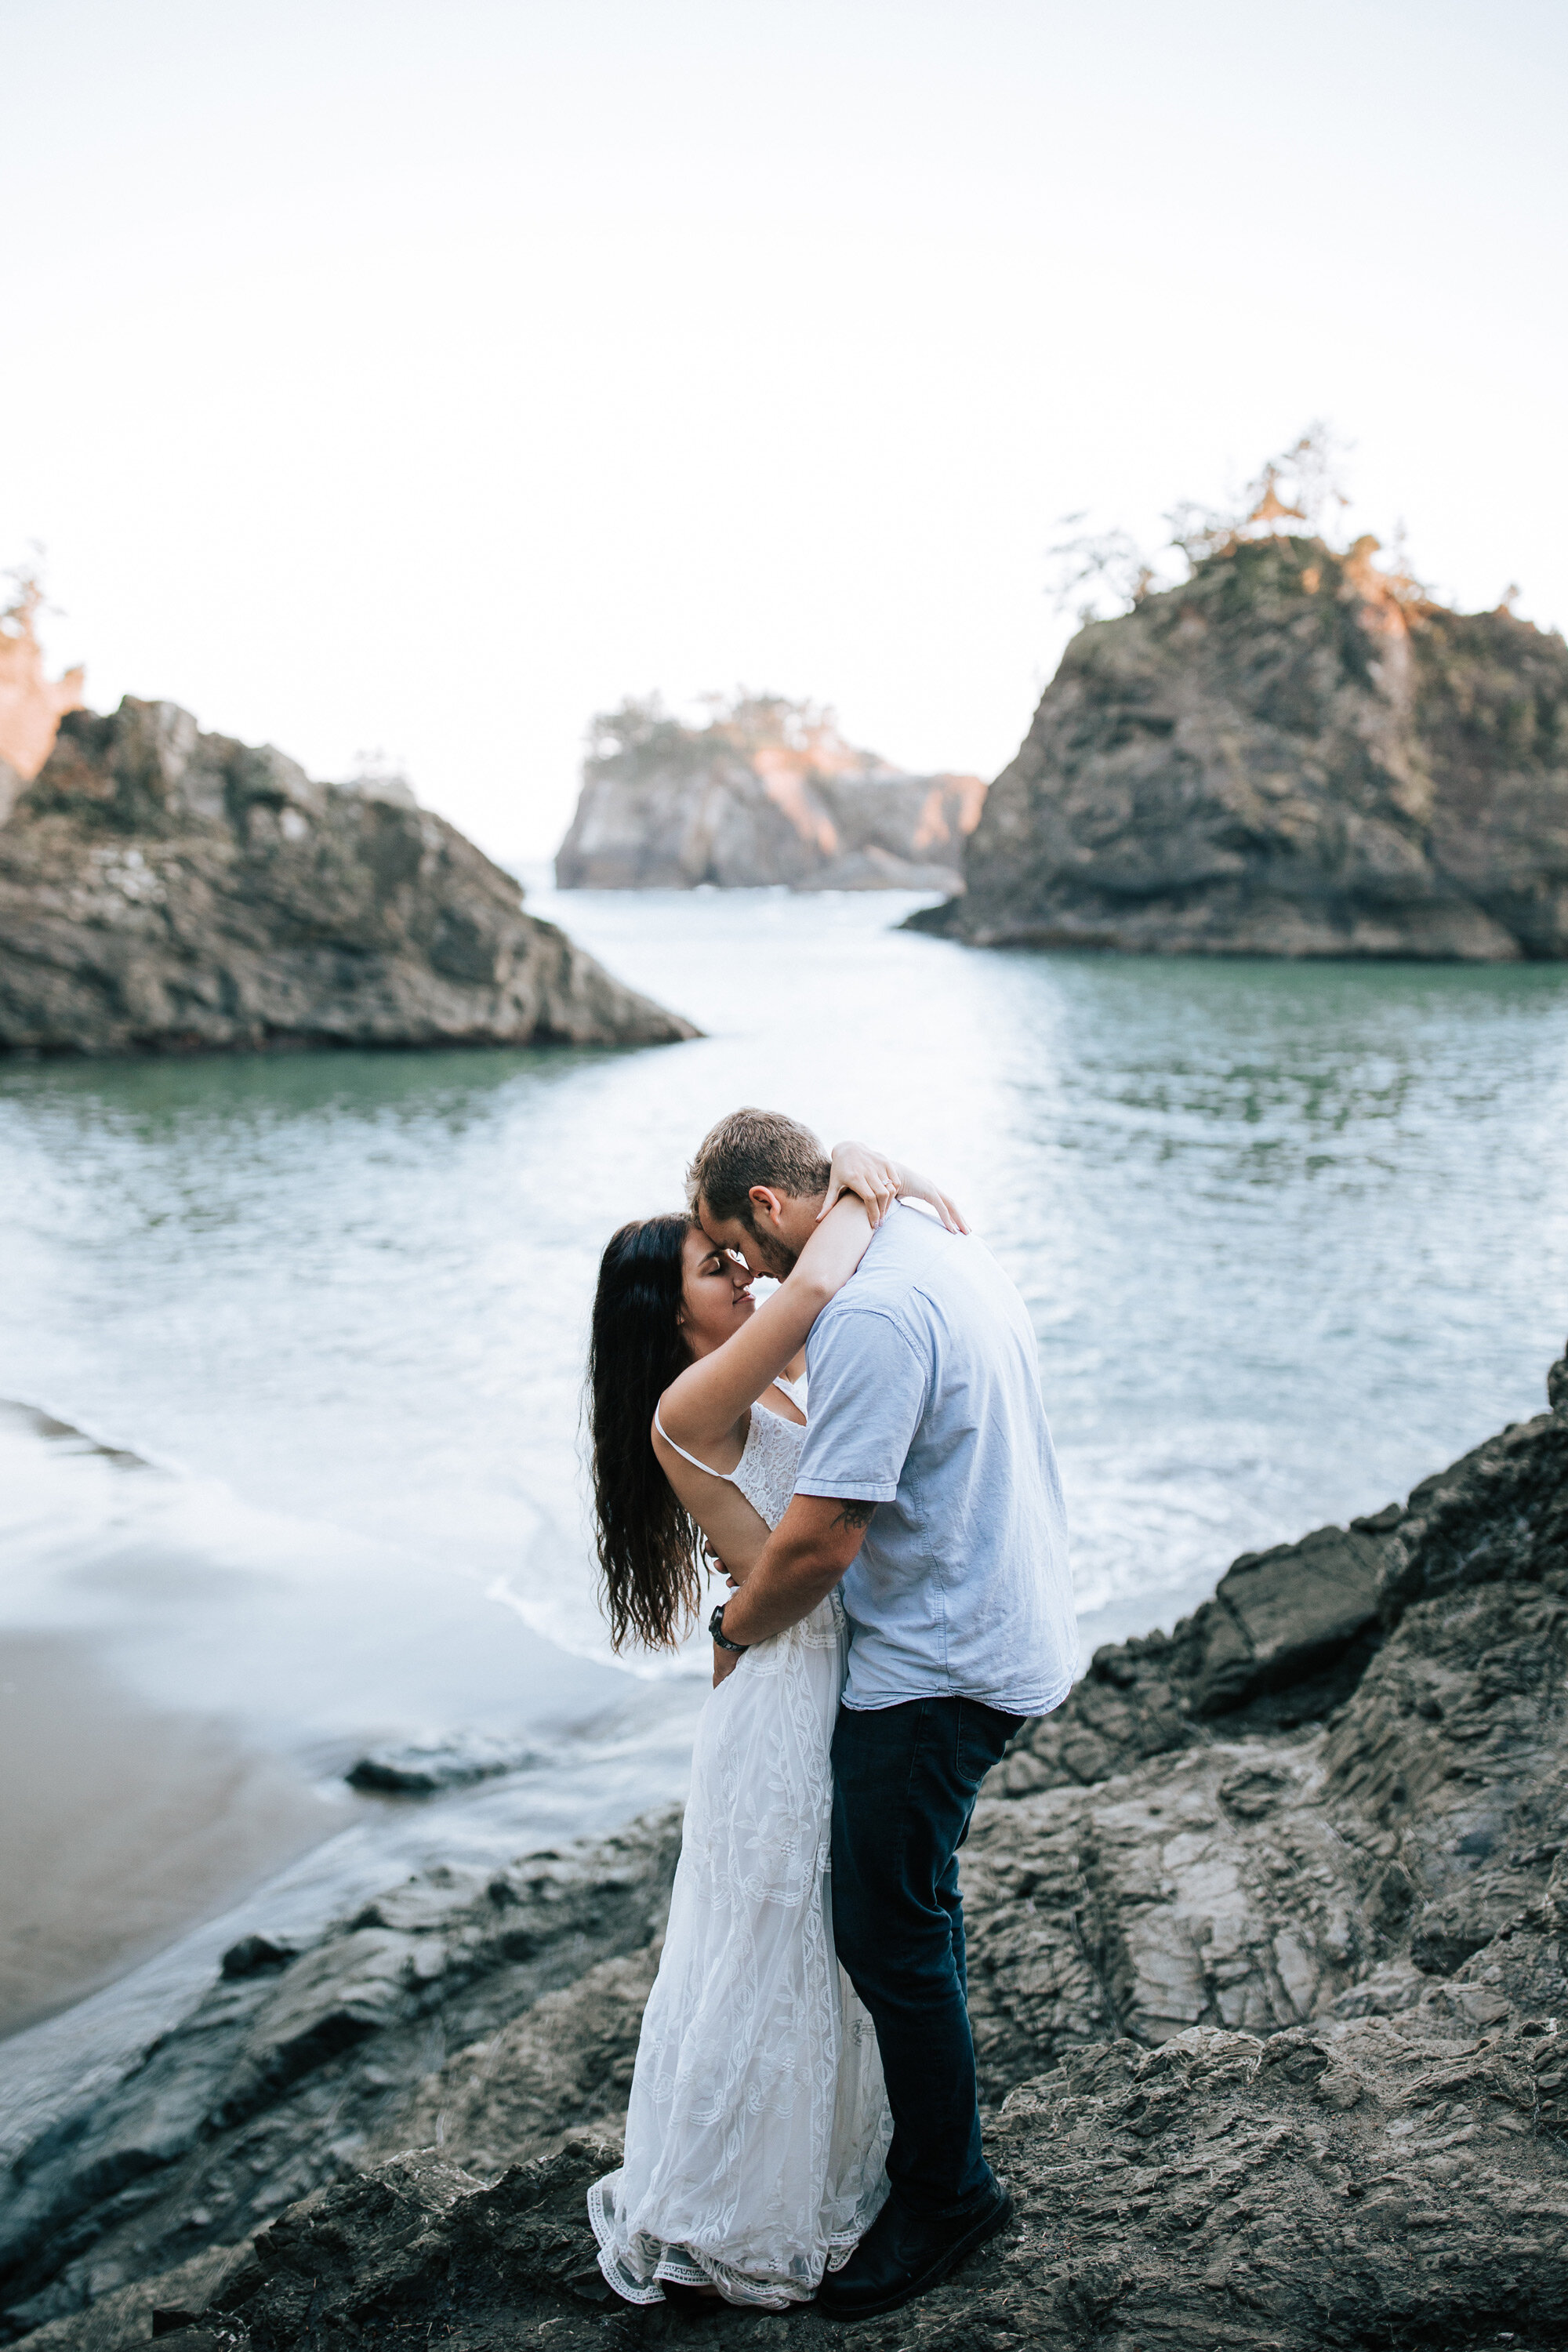  Breath-taking photo of a couple during an elopement on Brookings Beach with their heads together and arms wrapped around one another by Emily Jenkins Photography. elopement beach photos hidden private beach photos Oregon coast towns #emilyjenkinspho